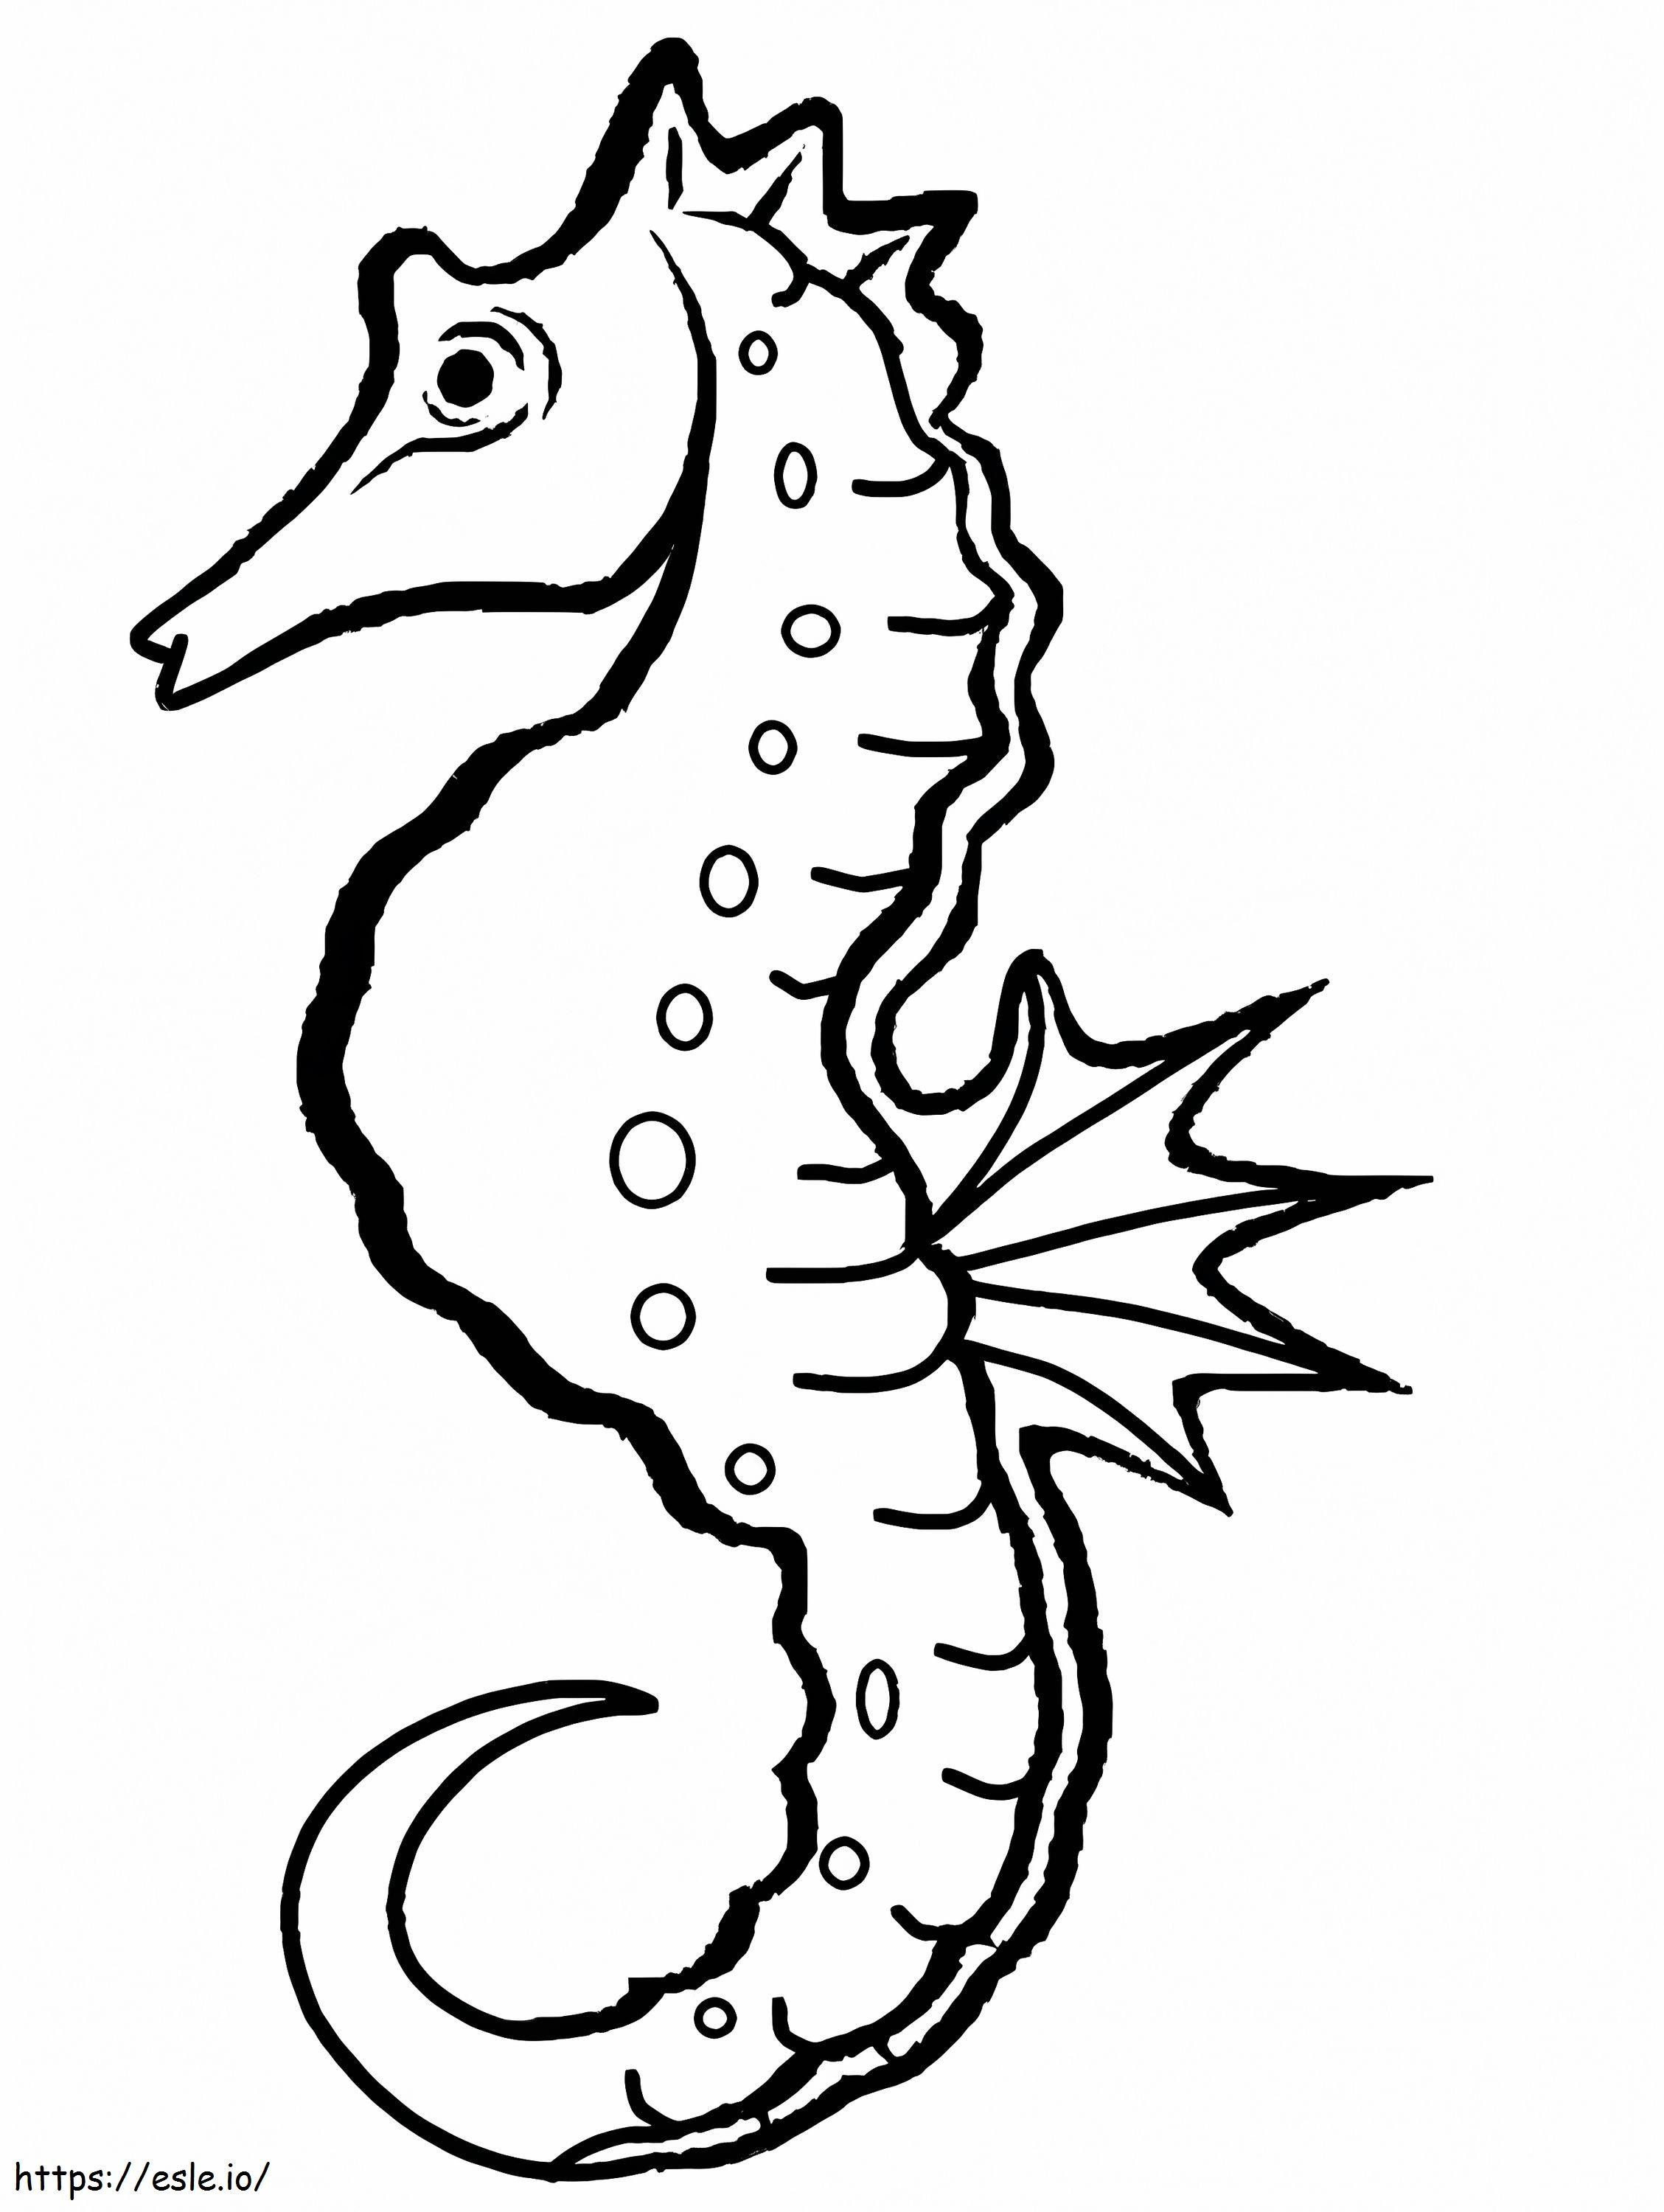 One Seahorse coloring page